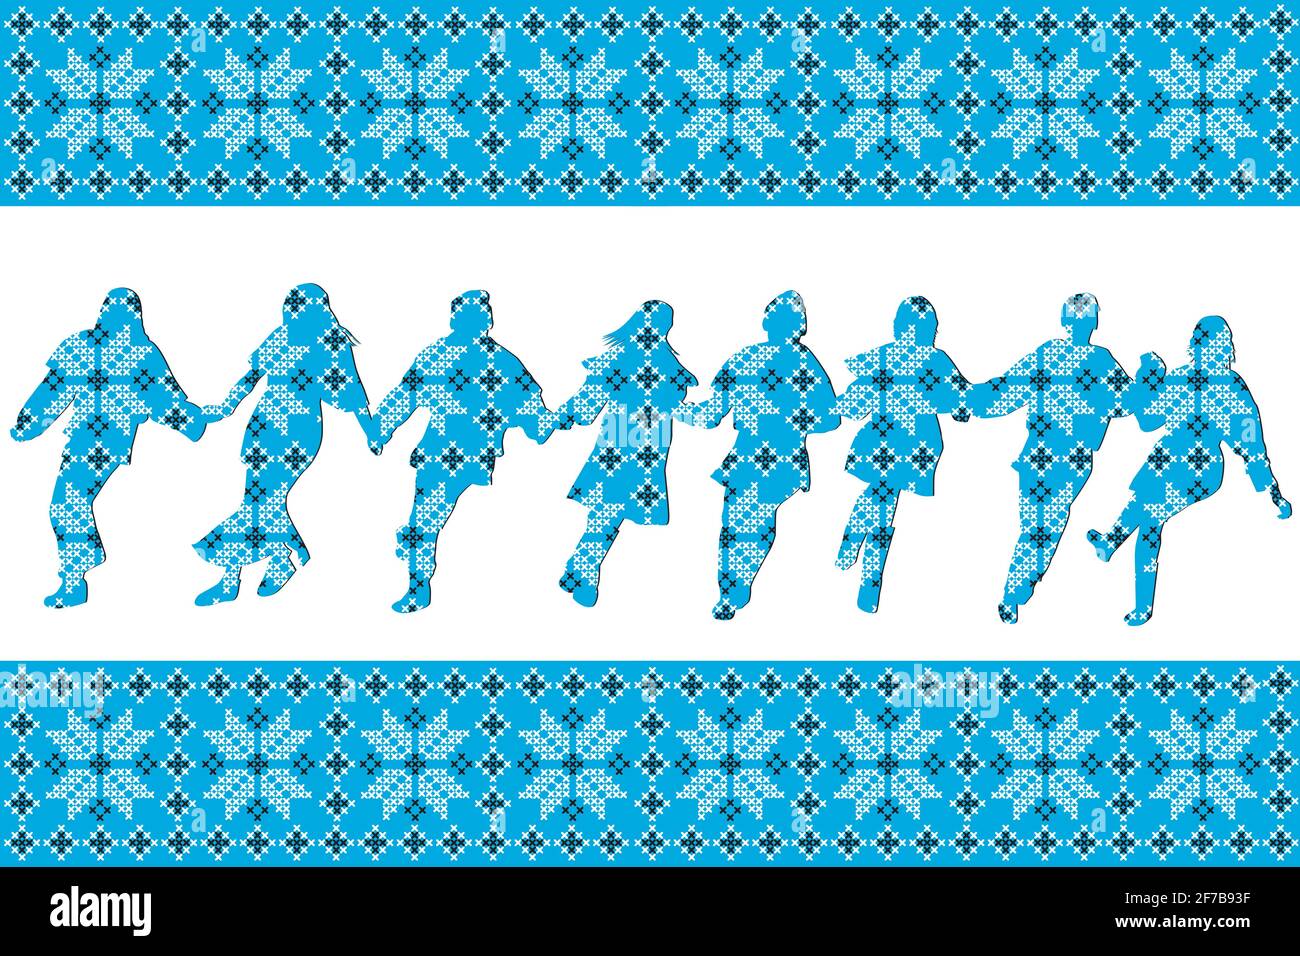 Blue ethnic motifs background with traditional dancers silhouettes Stock Vector